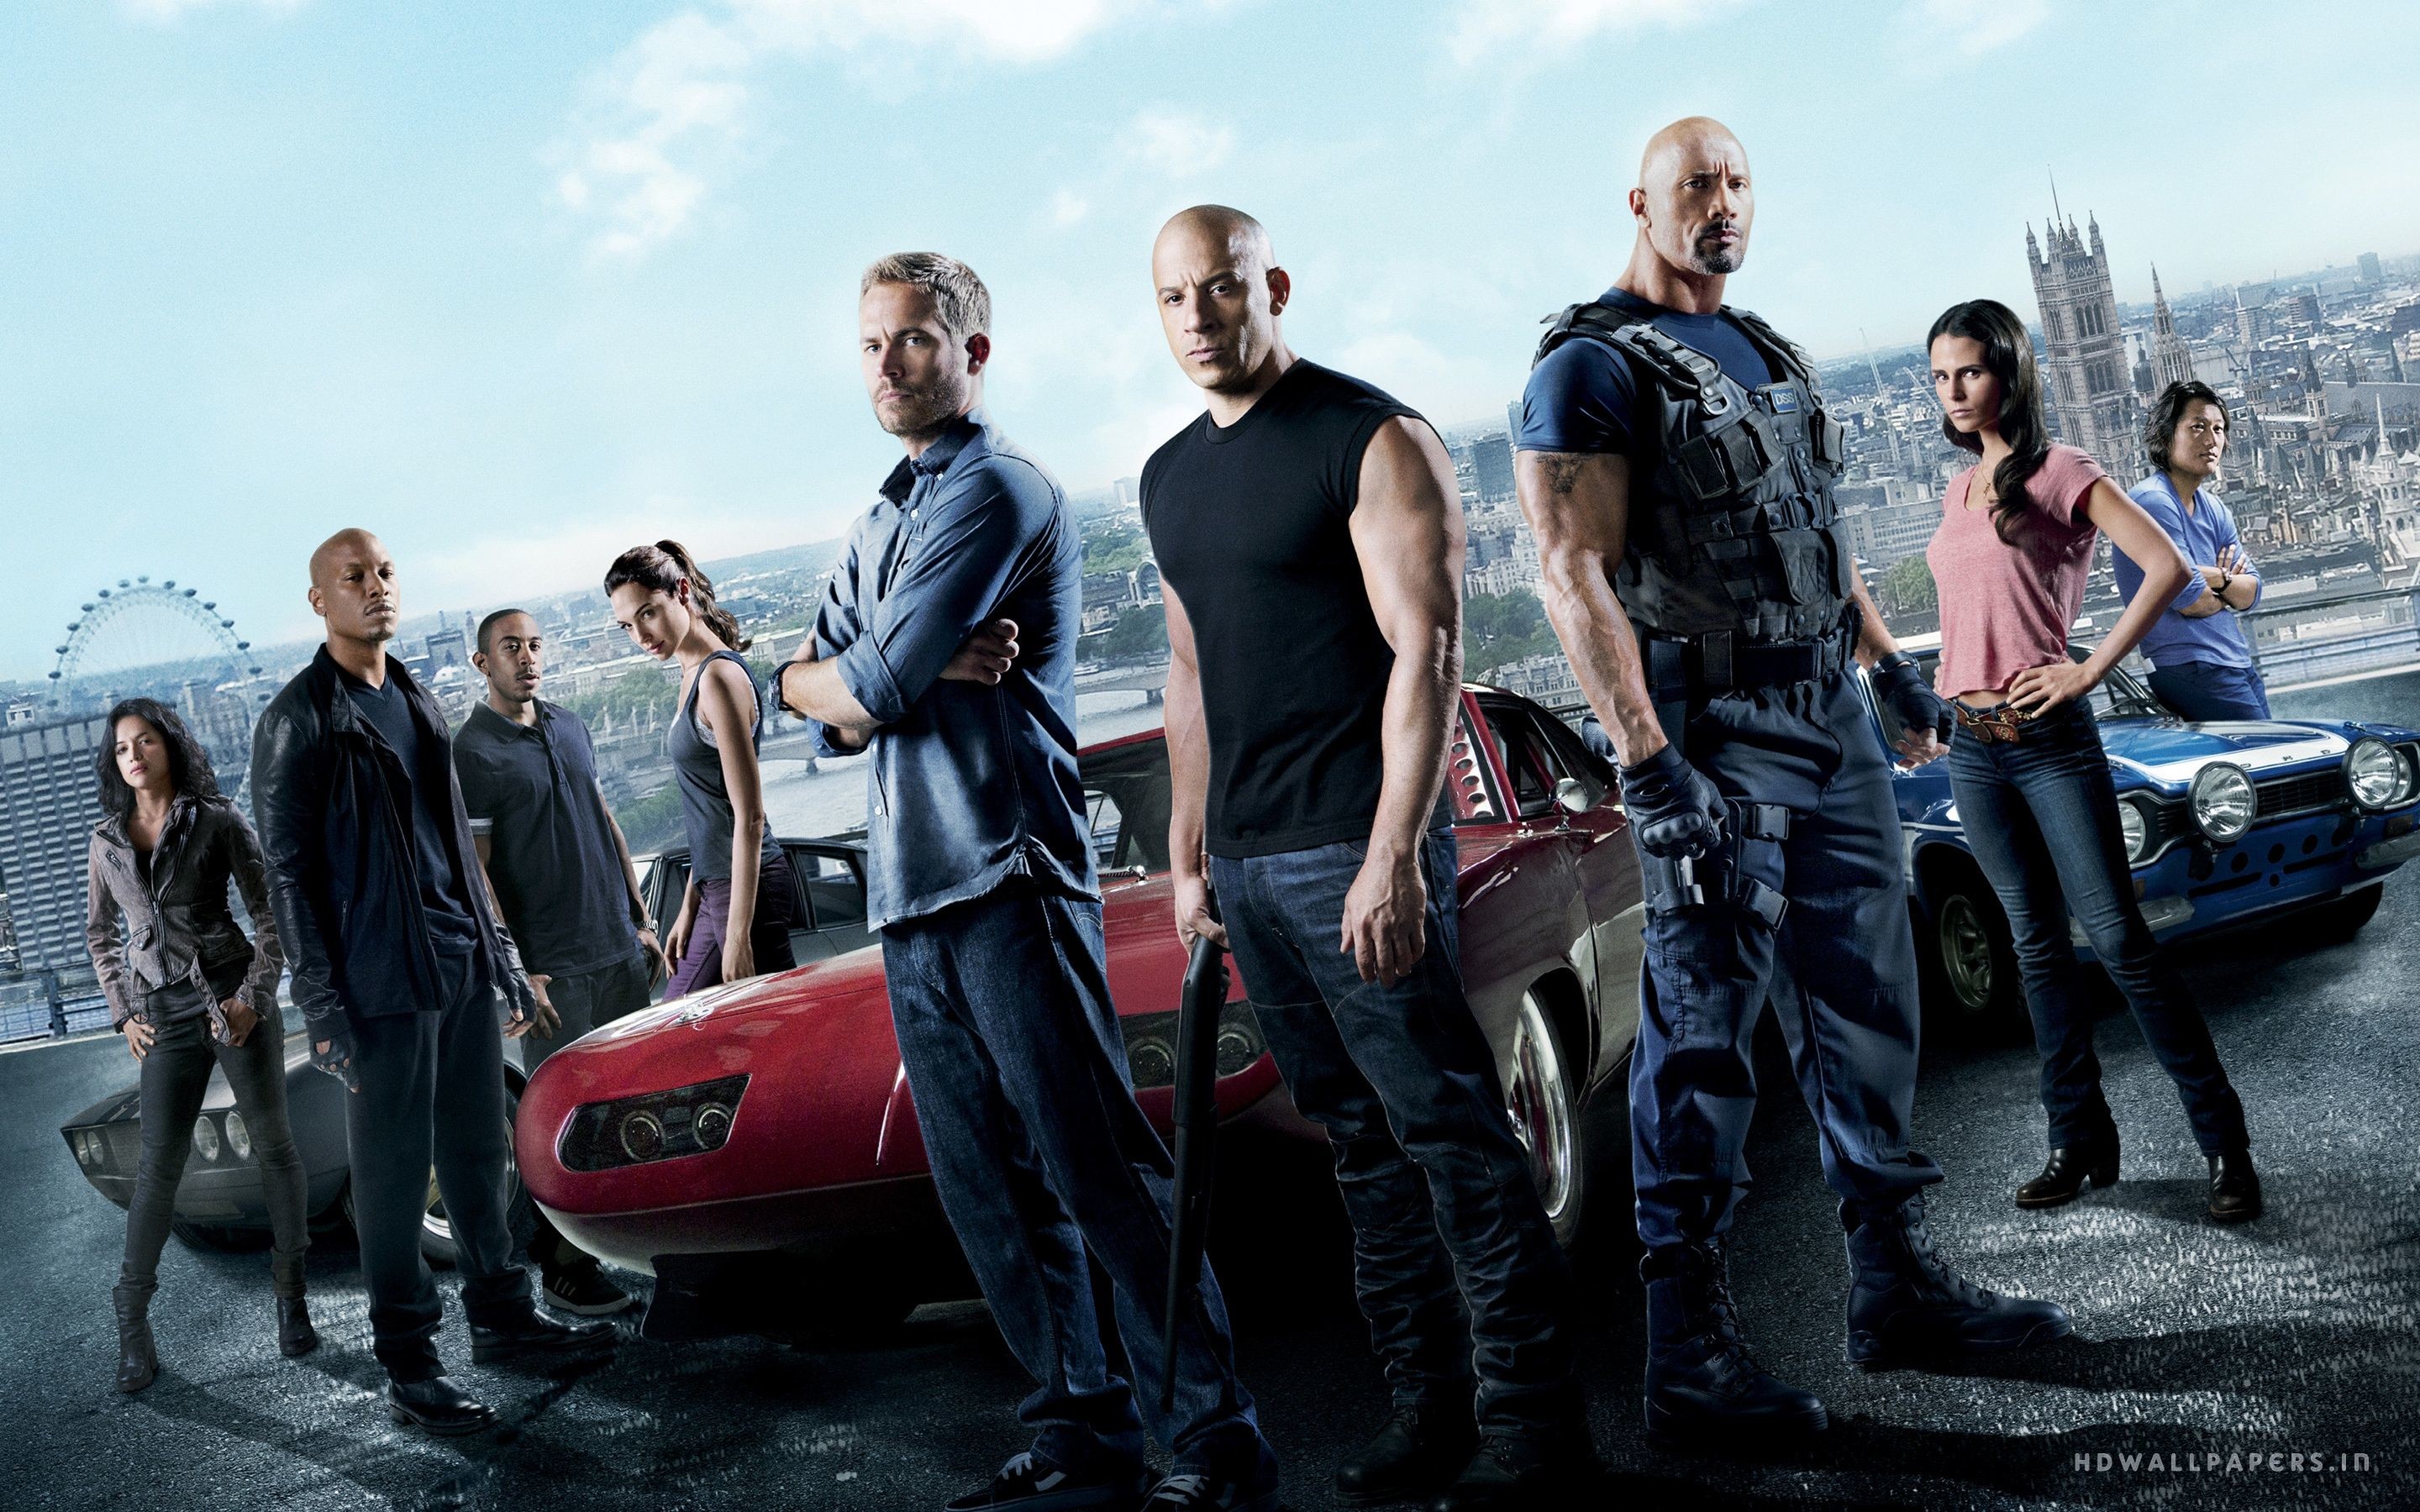 2880x1800 3840x2400 Fast and Furious Cars Hd Wallpapers Beautiful 8 Inspirational Fast  .